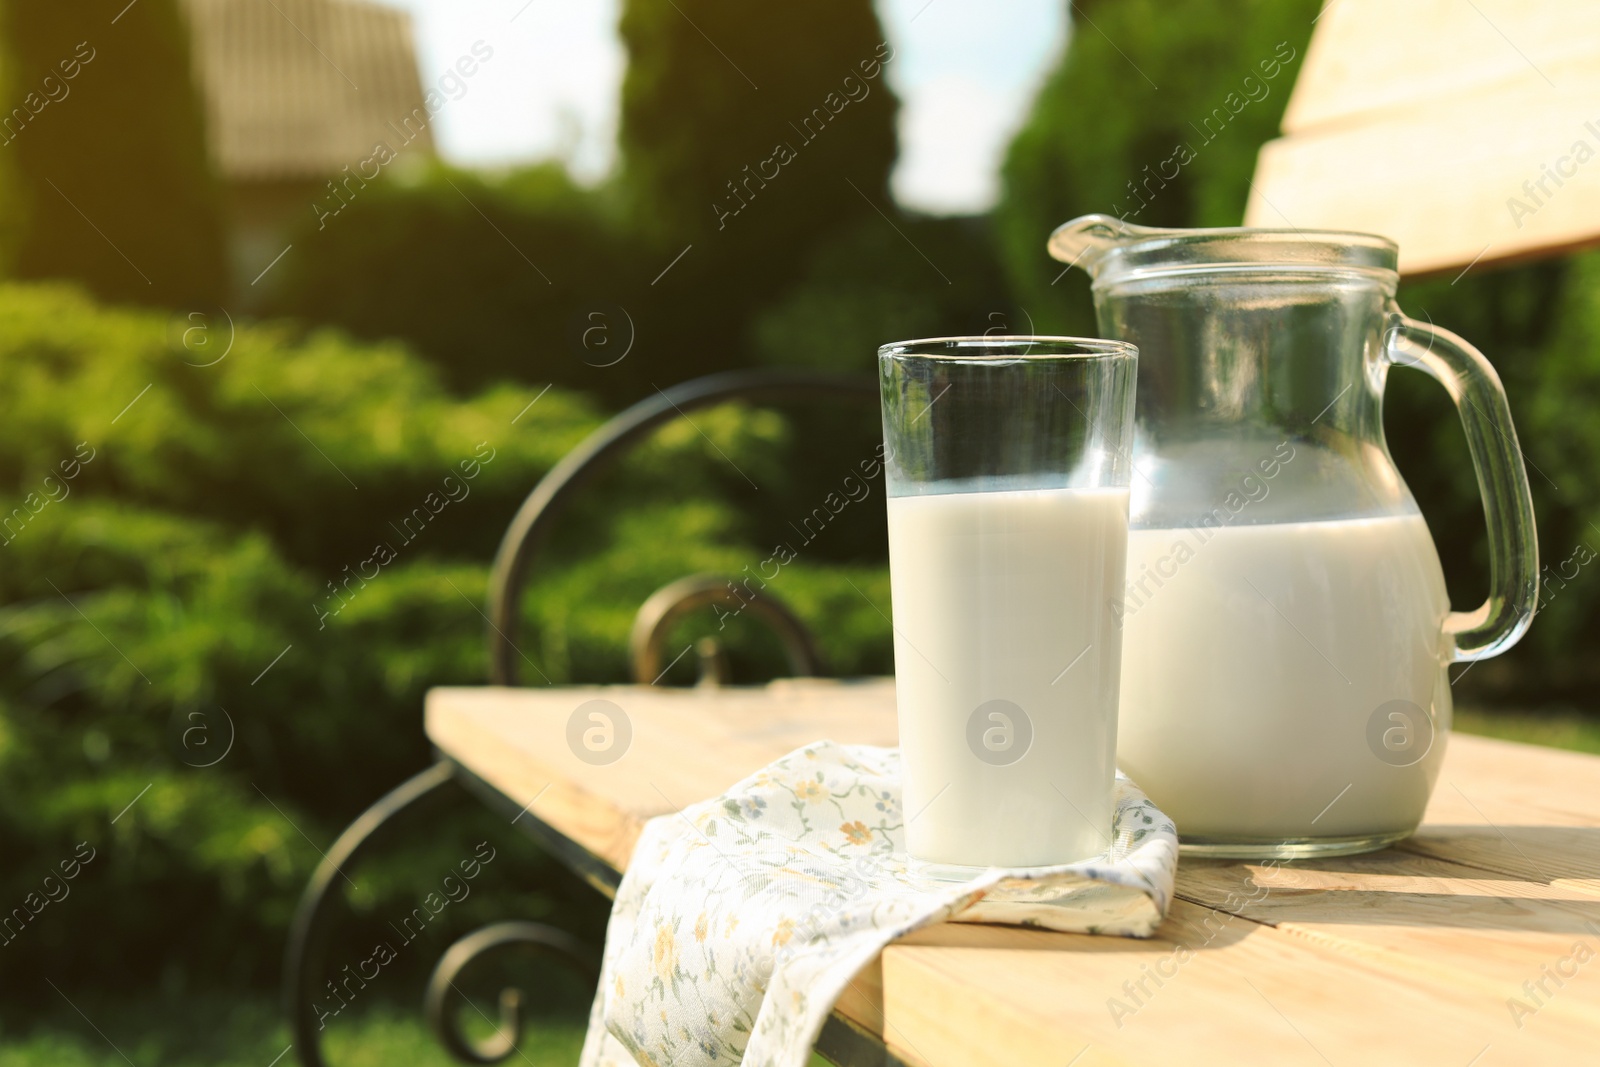 Photo of Jug and glass of tasty fresh milk on wooden bench outdoors, space for text